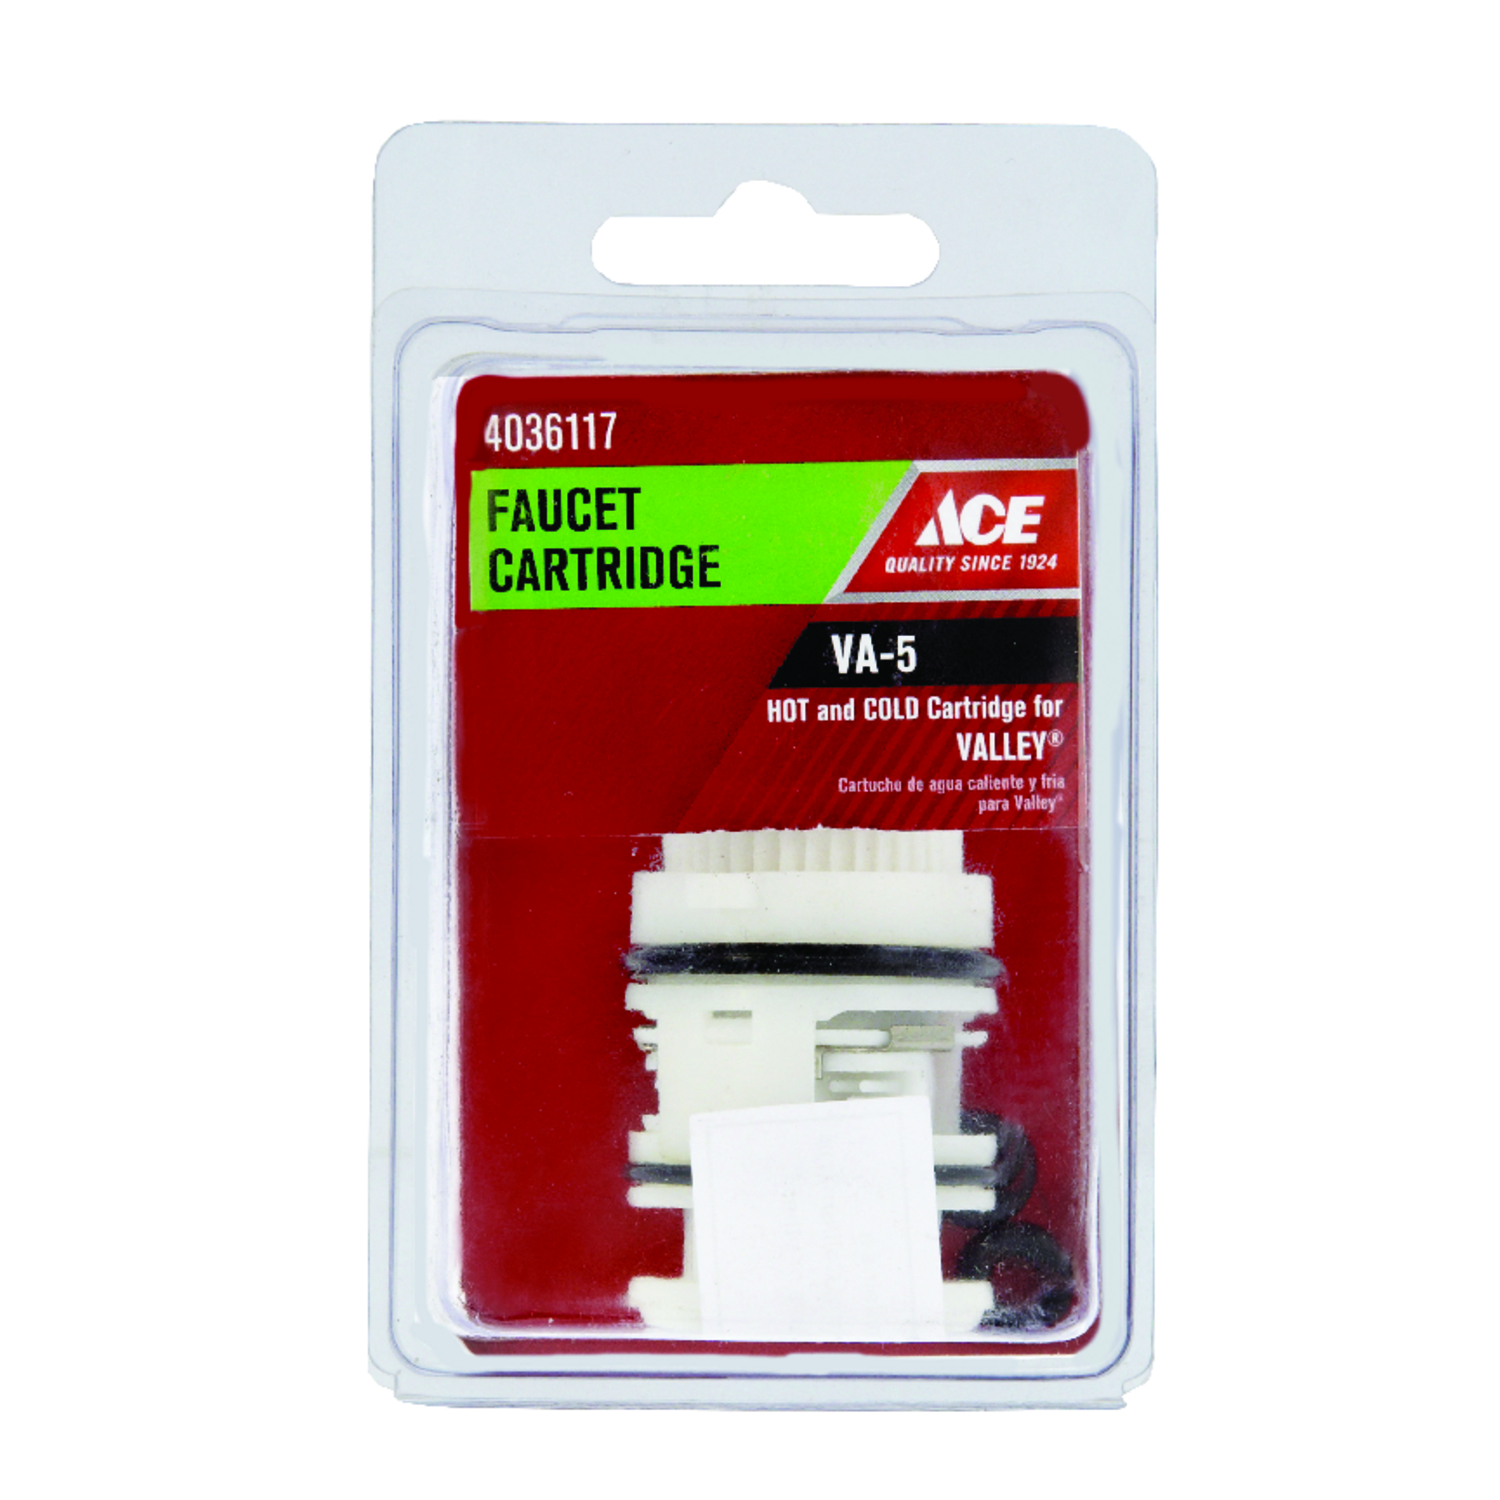 Photos - Other sanitary accessories Ace VA-5 Hot and Cold Faucet Cartridge For Valley A0088198 